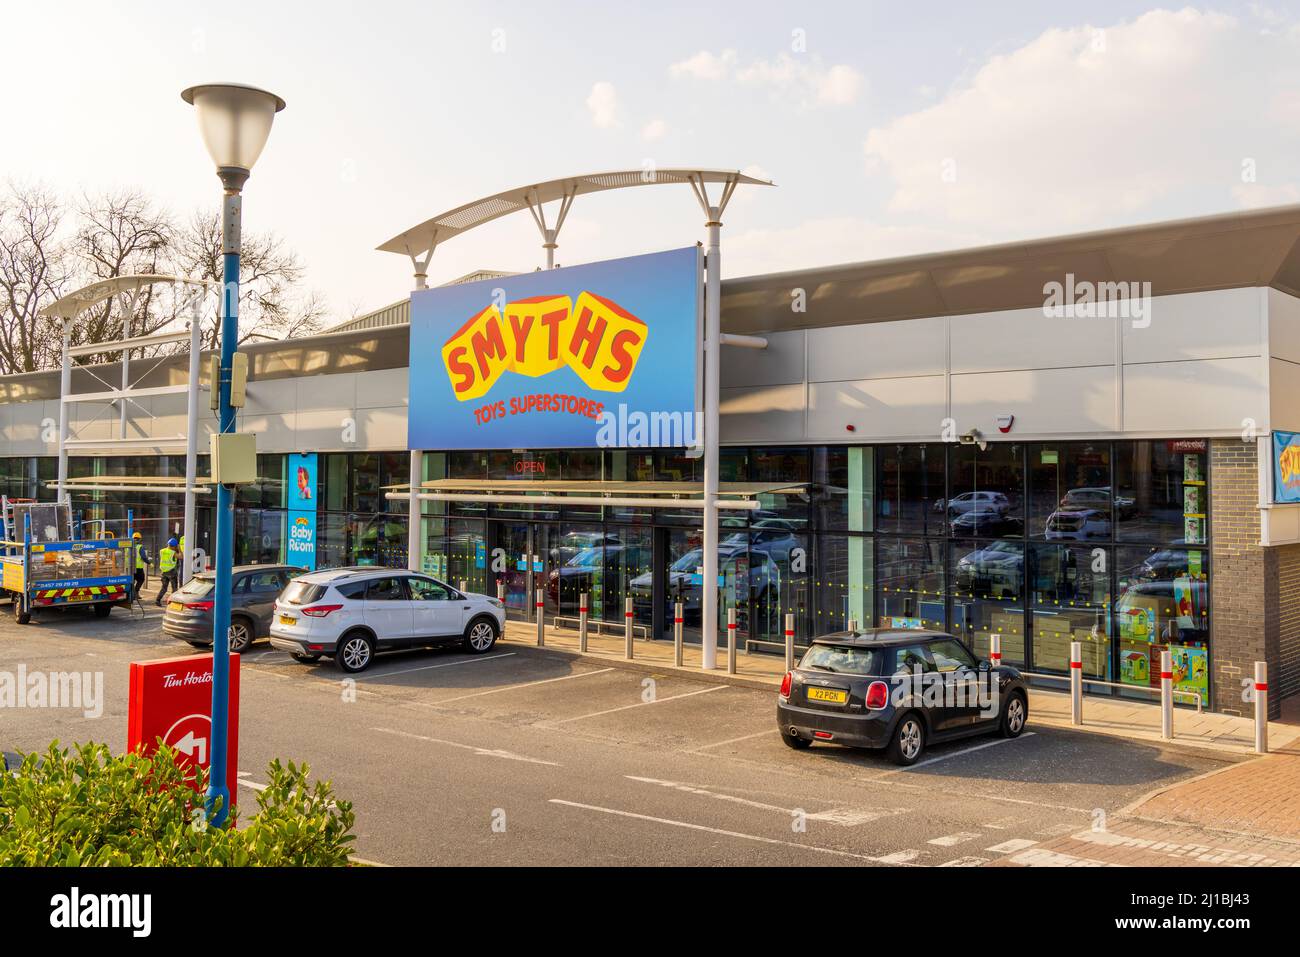 Smyths Toys Superstore in a retail outlet. Harlow, Essex. UK Stock Photo -  Alamy